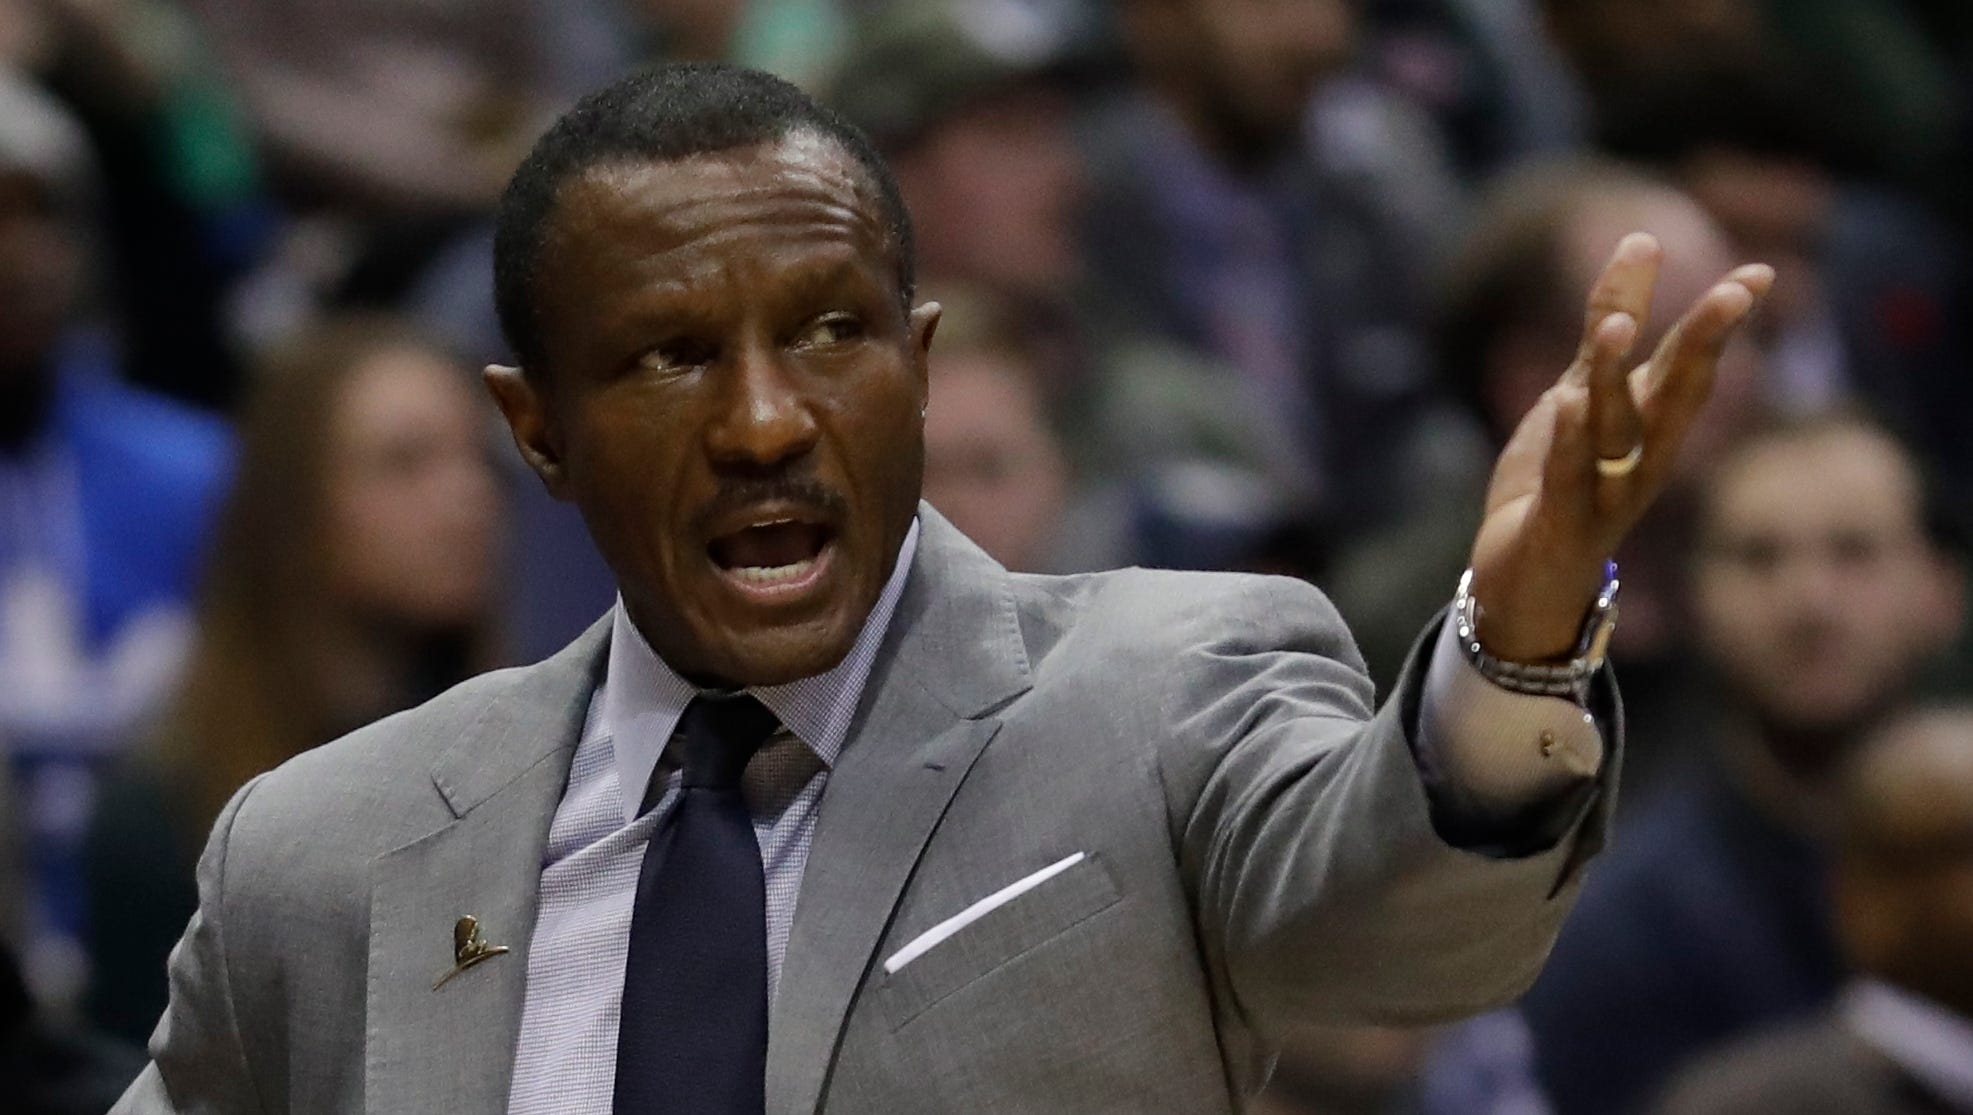 Toronto Raptors head coach Dwane Casey reacts during the first half of an NBA basketball game against the Milwaukee Bucks Friday, Jan. 5, 2018, in Milwaukee.